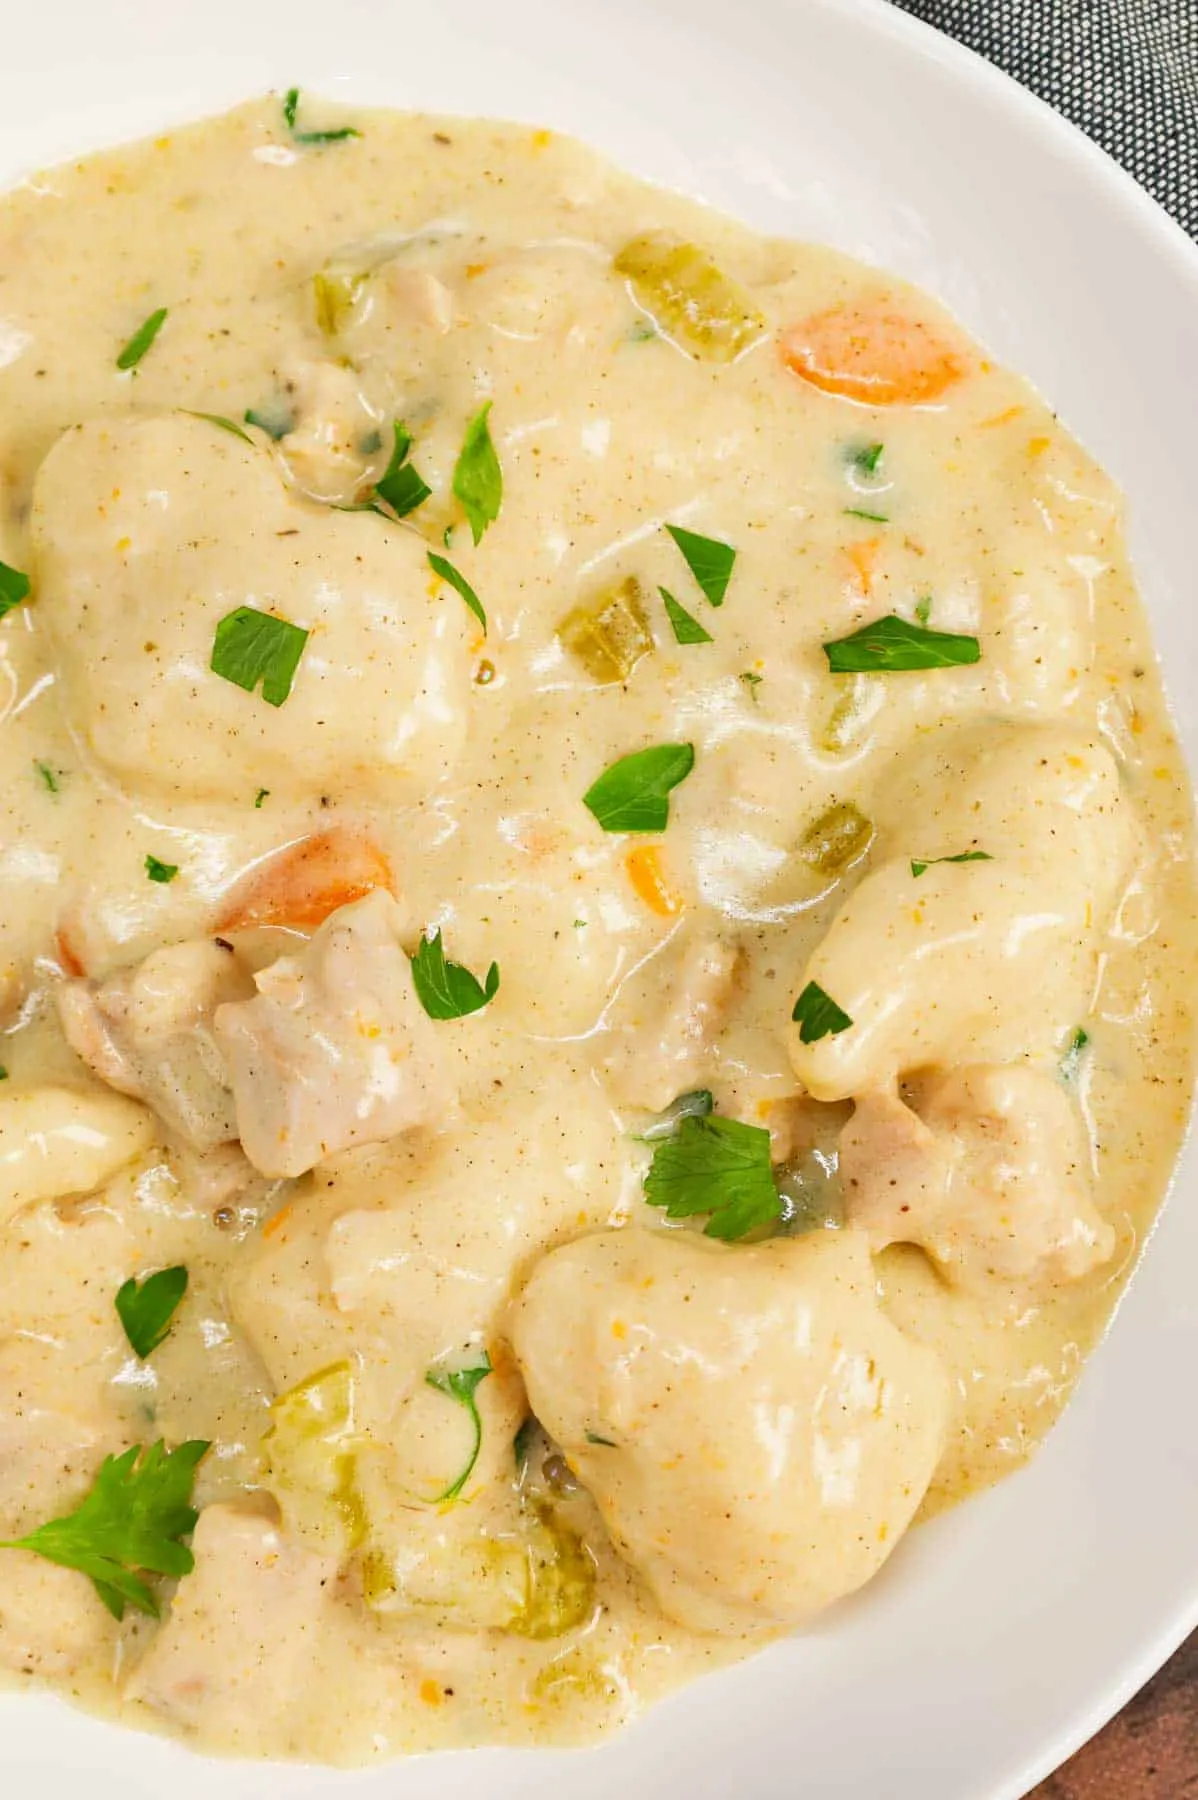 Dutch Oven Chicken and Dumplings is hearty dinner recipe loaded with chunks of chicken, onion, celery, carrots and soft doughy Bisquick dumplings all in a creamy and flavourful broth.